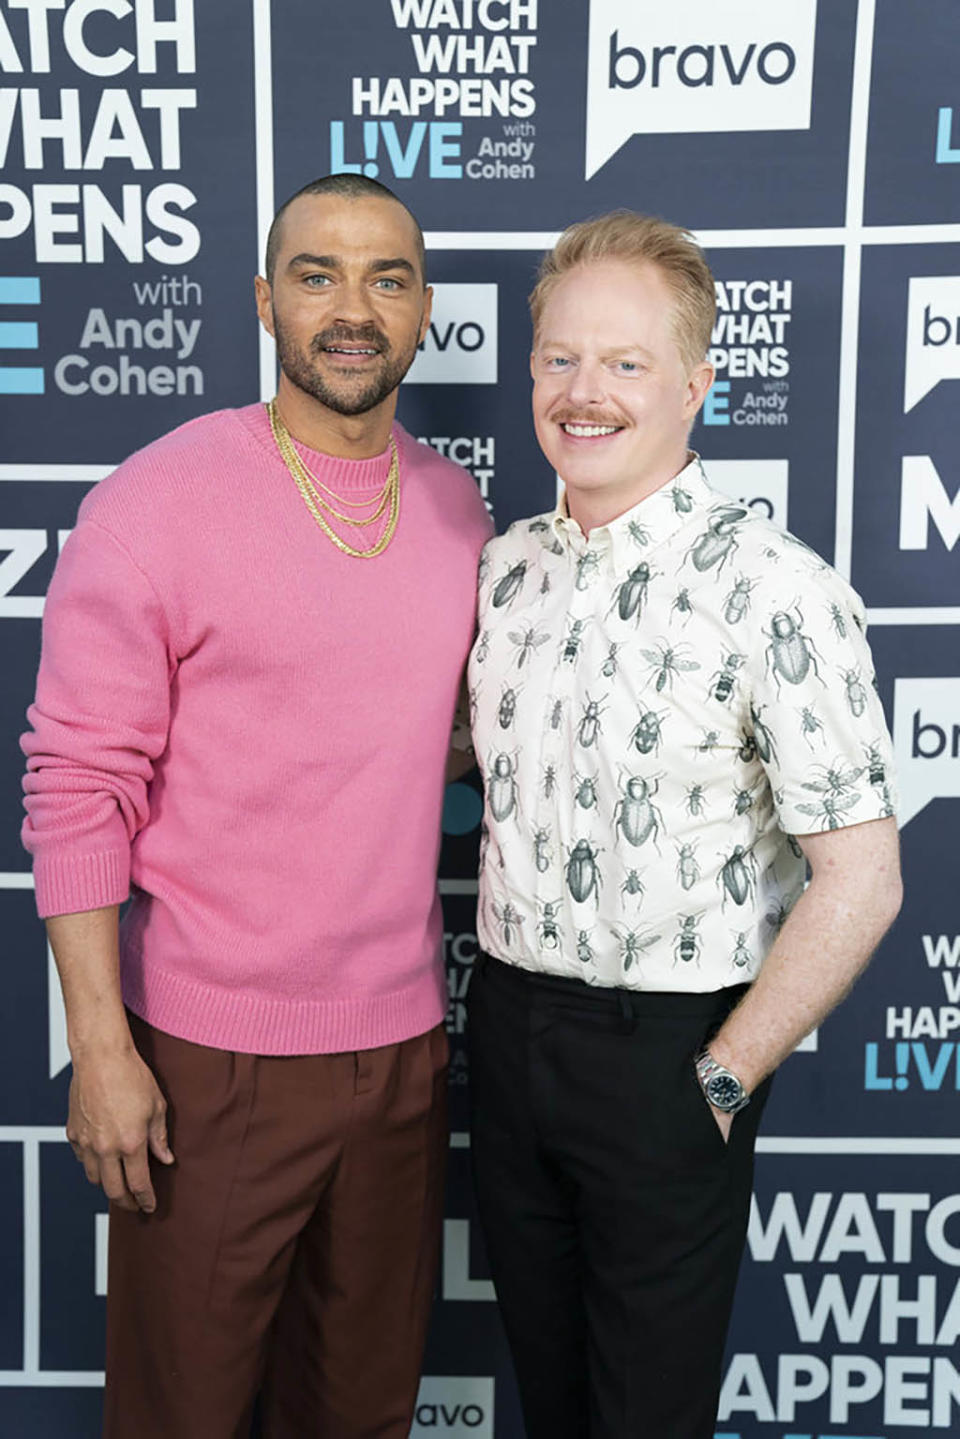 (L-R) Jesse Williams and Jesse Tyler Ferguson on “Watch What Happens Live With Andy Cohen” on May 9, 2022. - Credit: Ralph Bavaro/Bravo